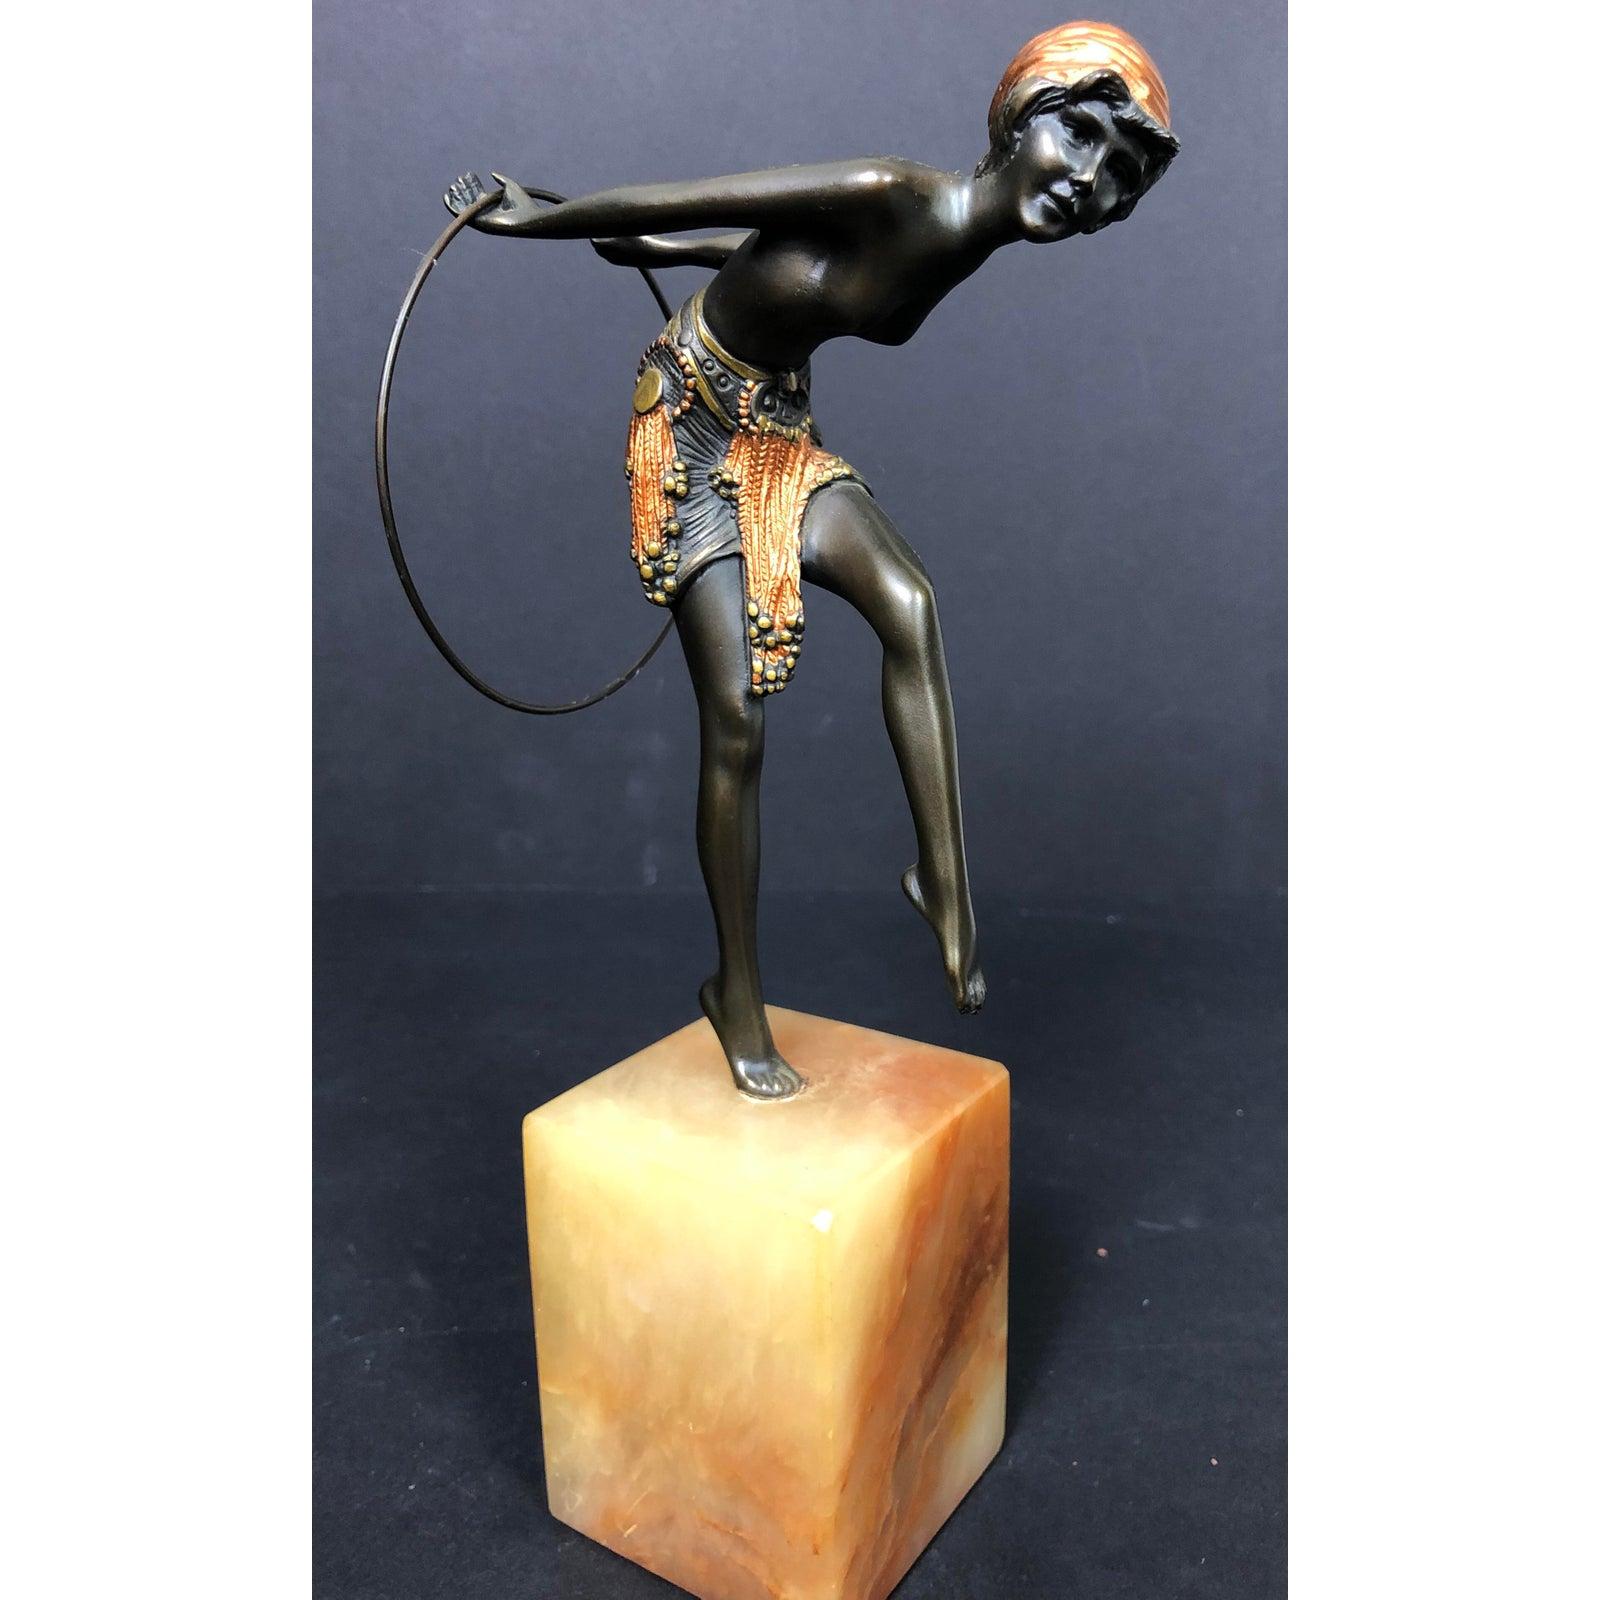 Art Deco Bronze Hoop Dancer. Beautiful quality Art Deco hoop dancer in a multi-tone patina mounted on an onyx or alabaster base.  